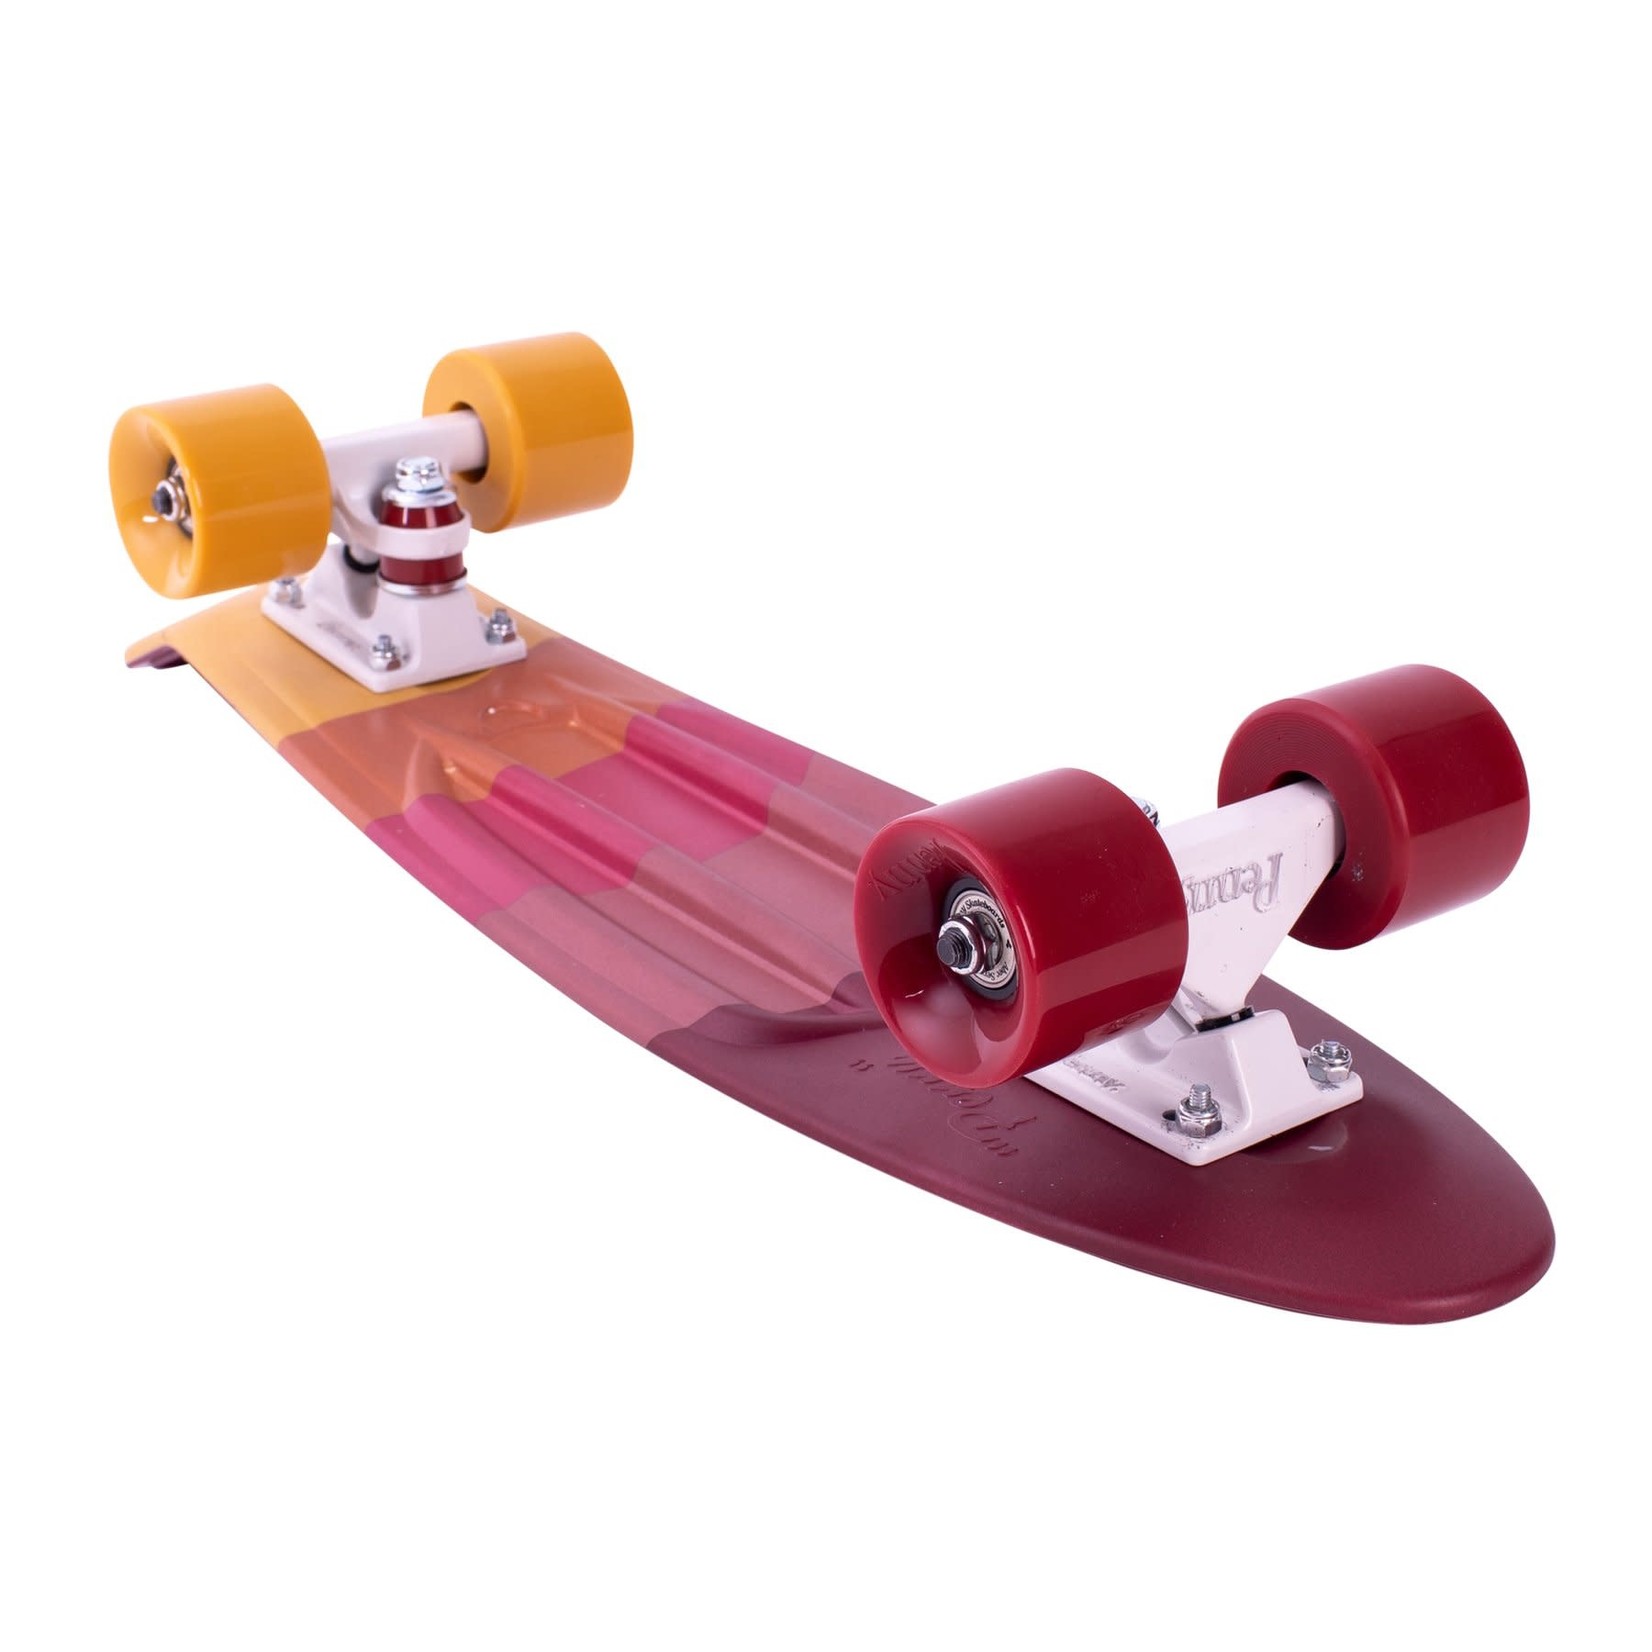 Penny Penny Board - Complete Rise Maroon 22"